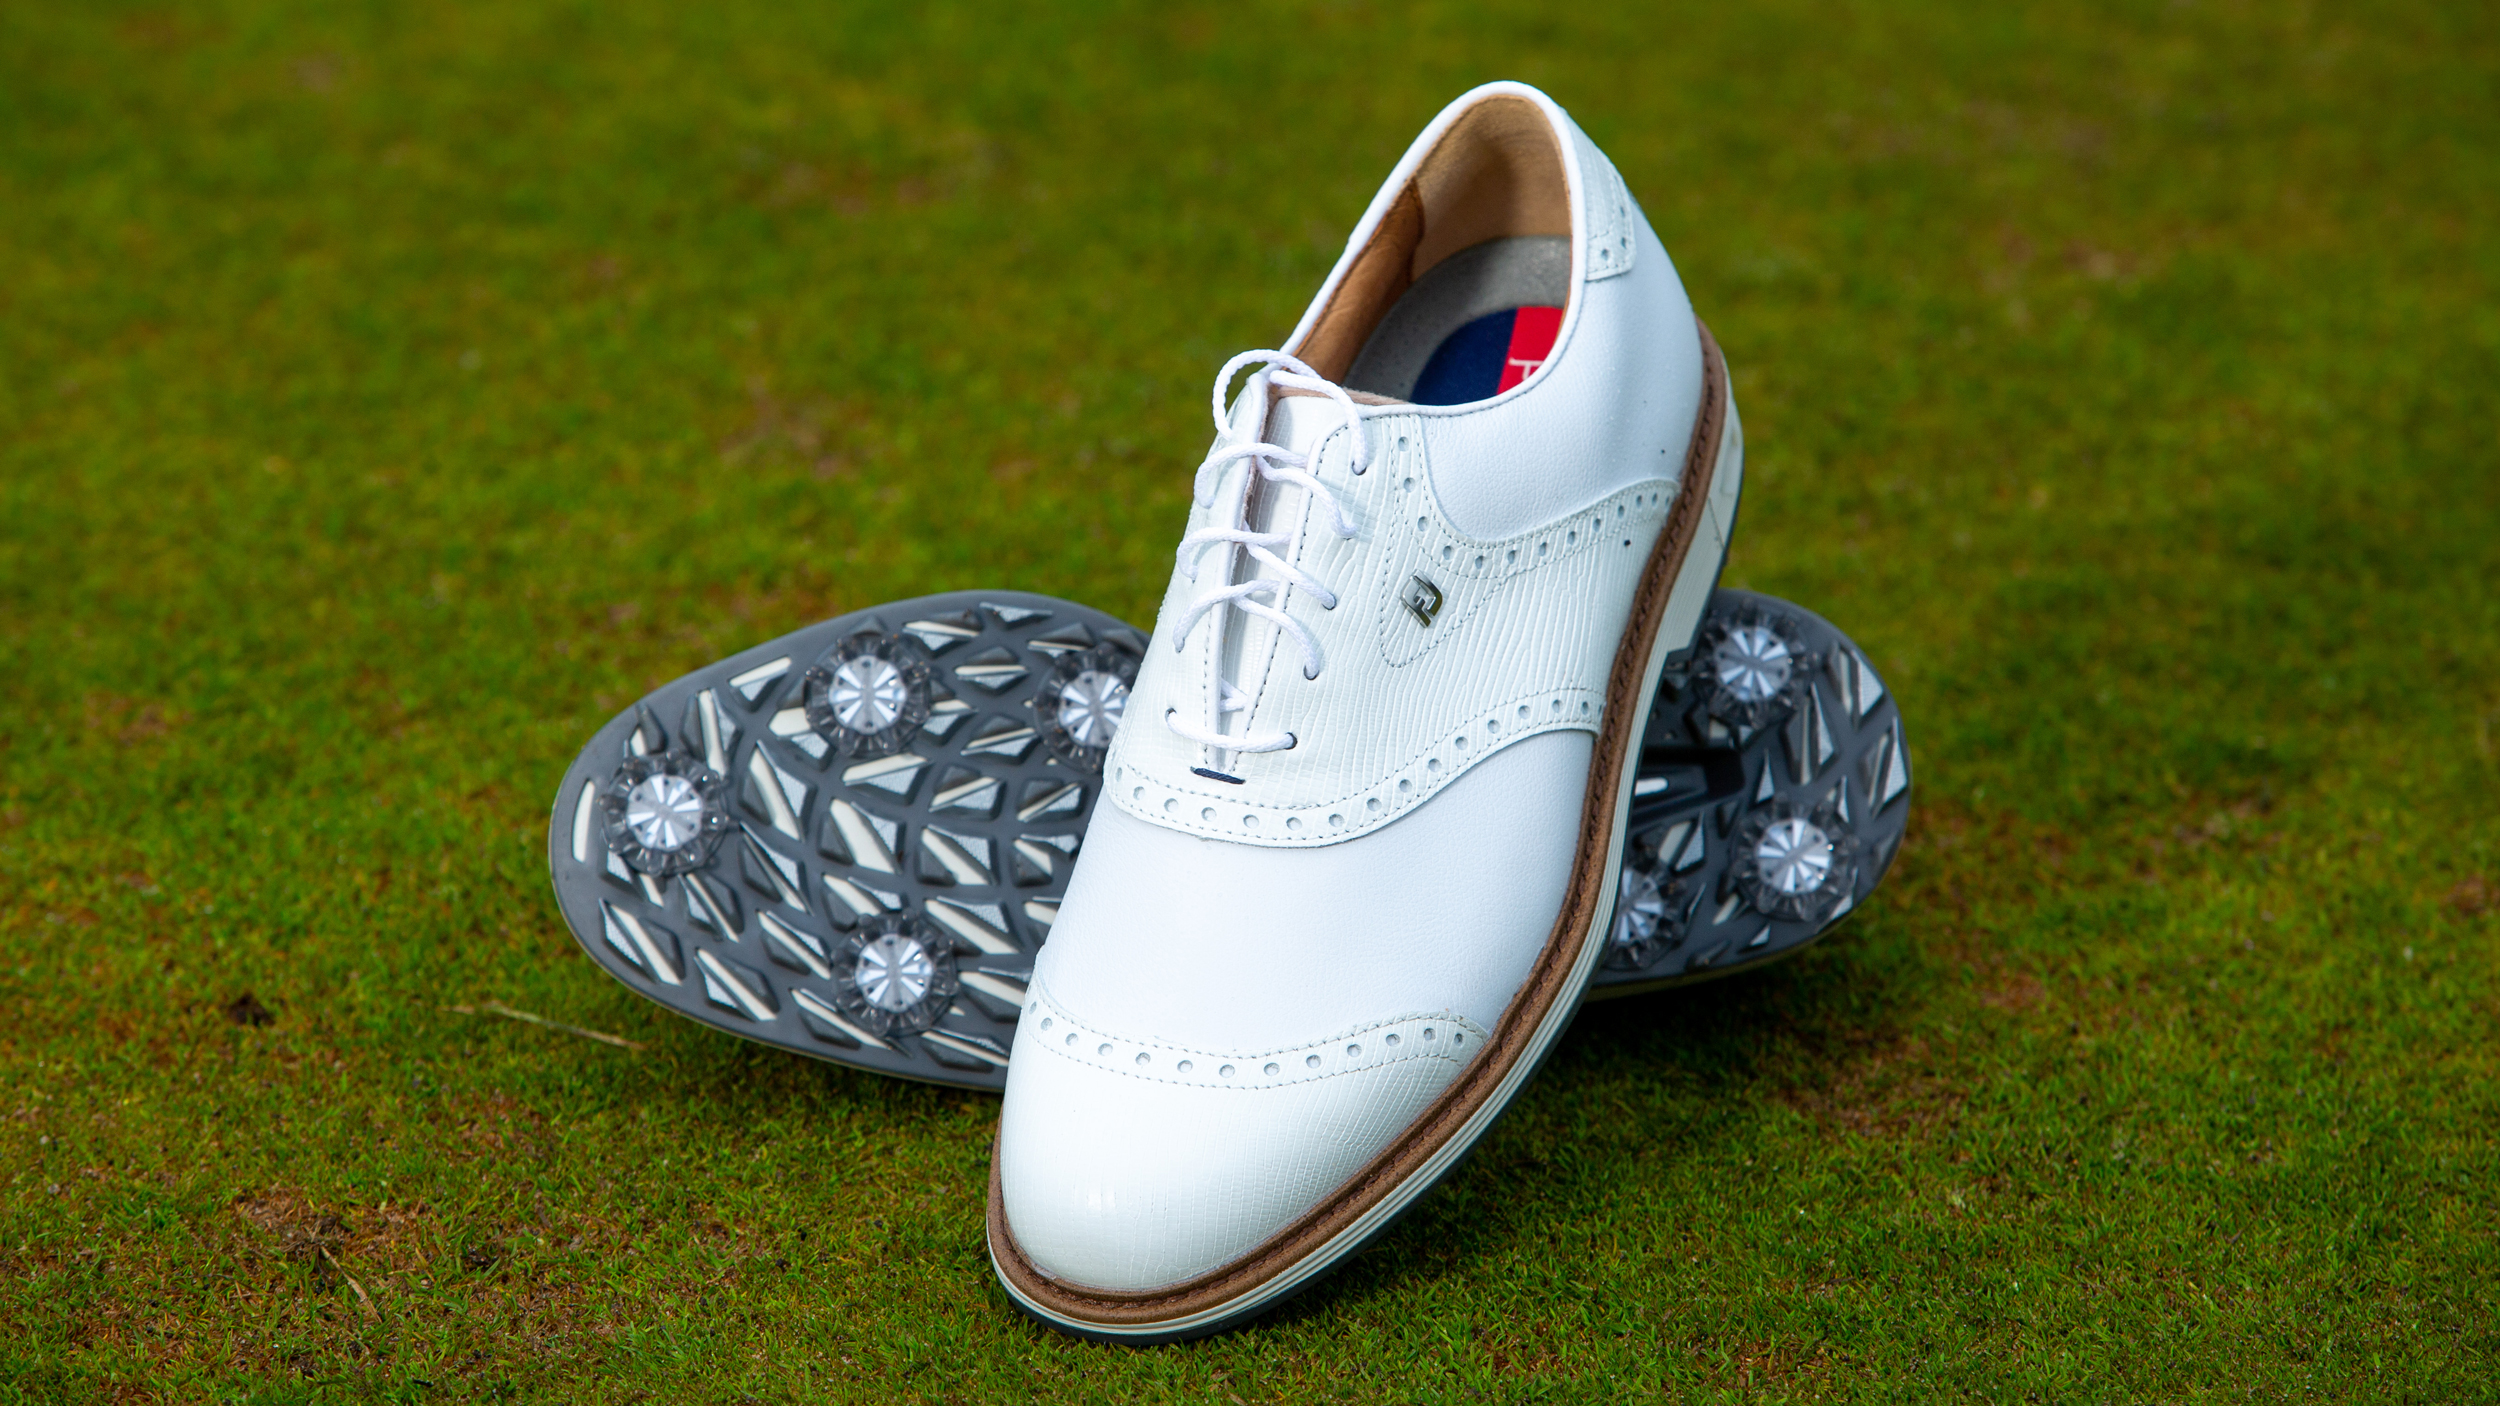 FootJoy Premiere Series Wilcox shoes in all-white